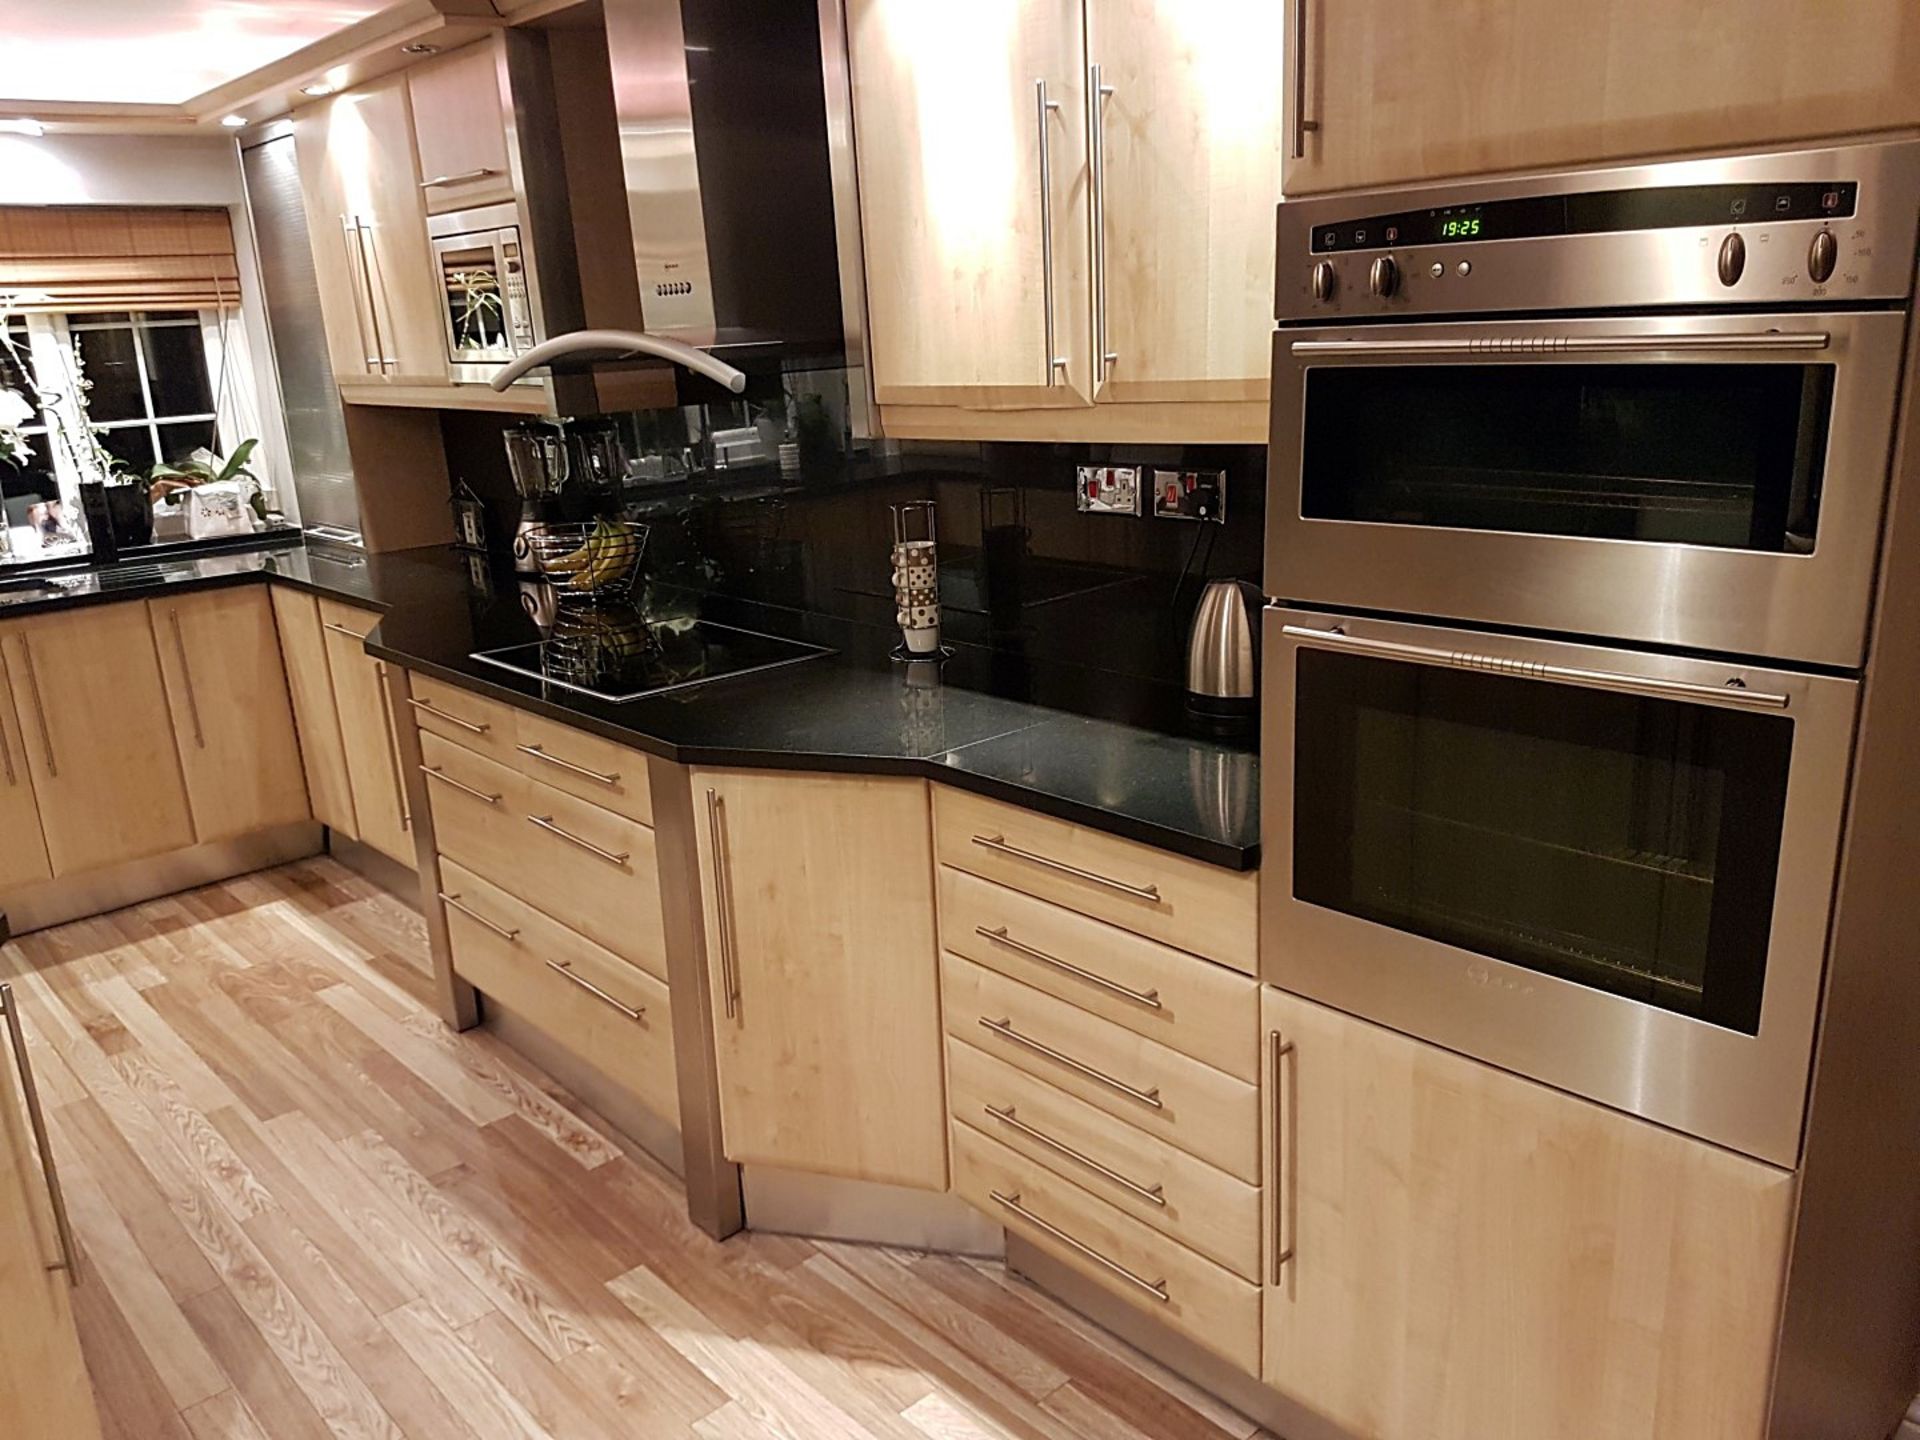 1 x Bespoke Fitted Kitchen With Granite Worktops And Integral NEFF Appliances - CL216 - Location: - Image 2 of 46